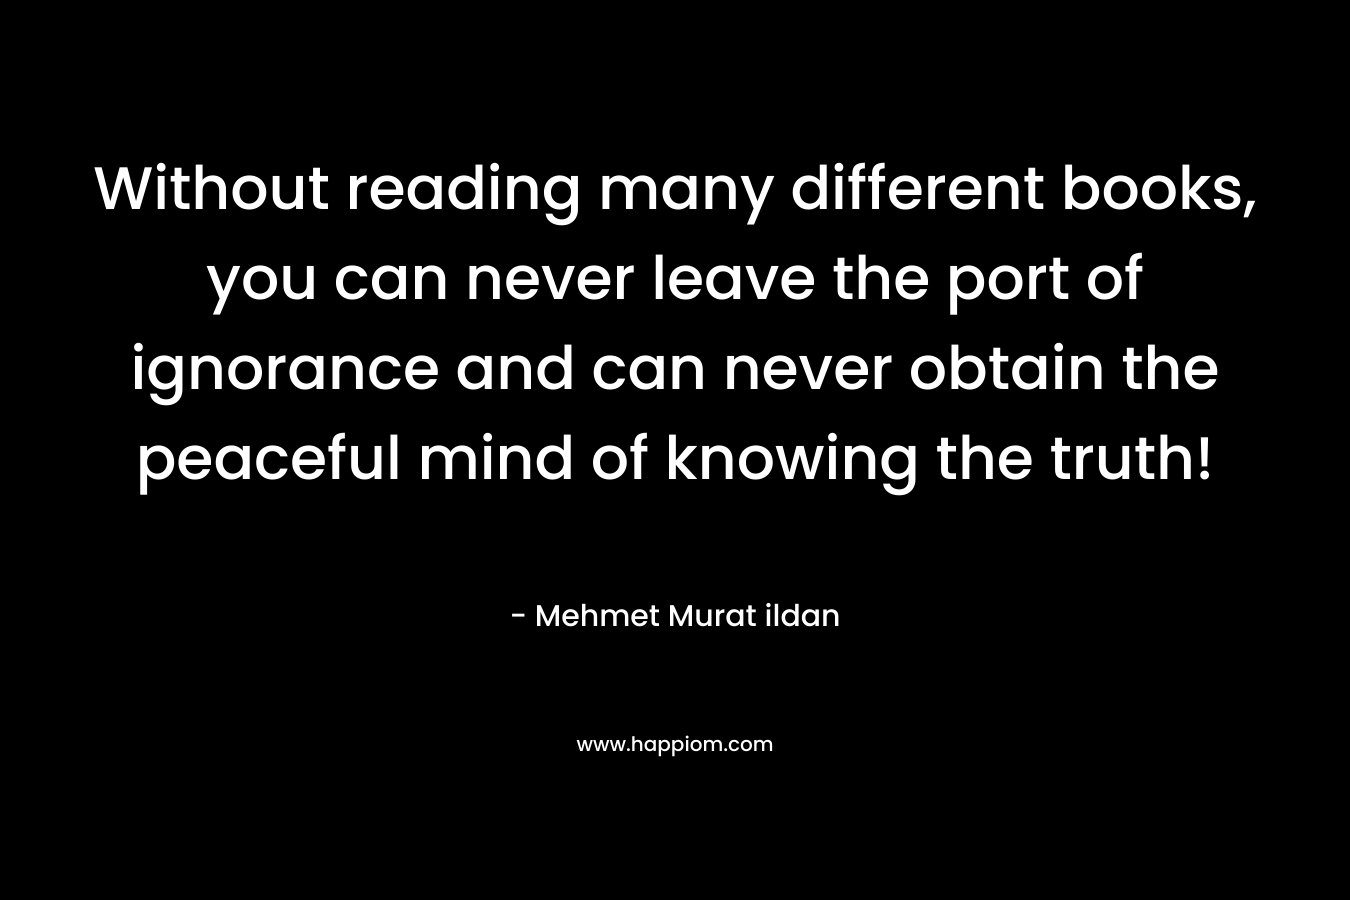 Without reading many different books, you can never leave the port of ignorance and can never obtain the peaceful mind of knowing the truth!